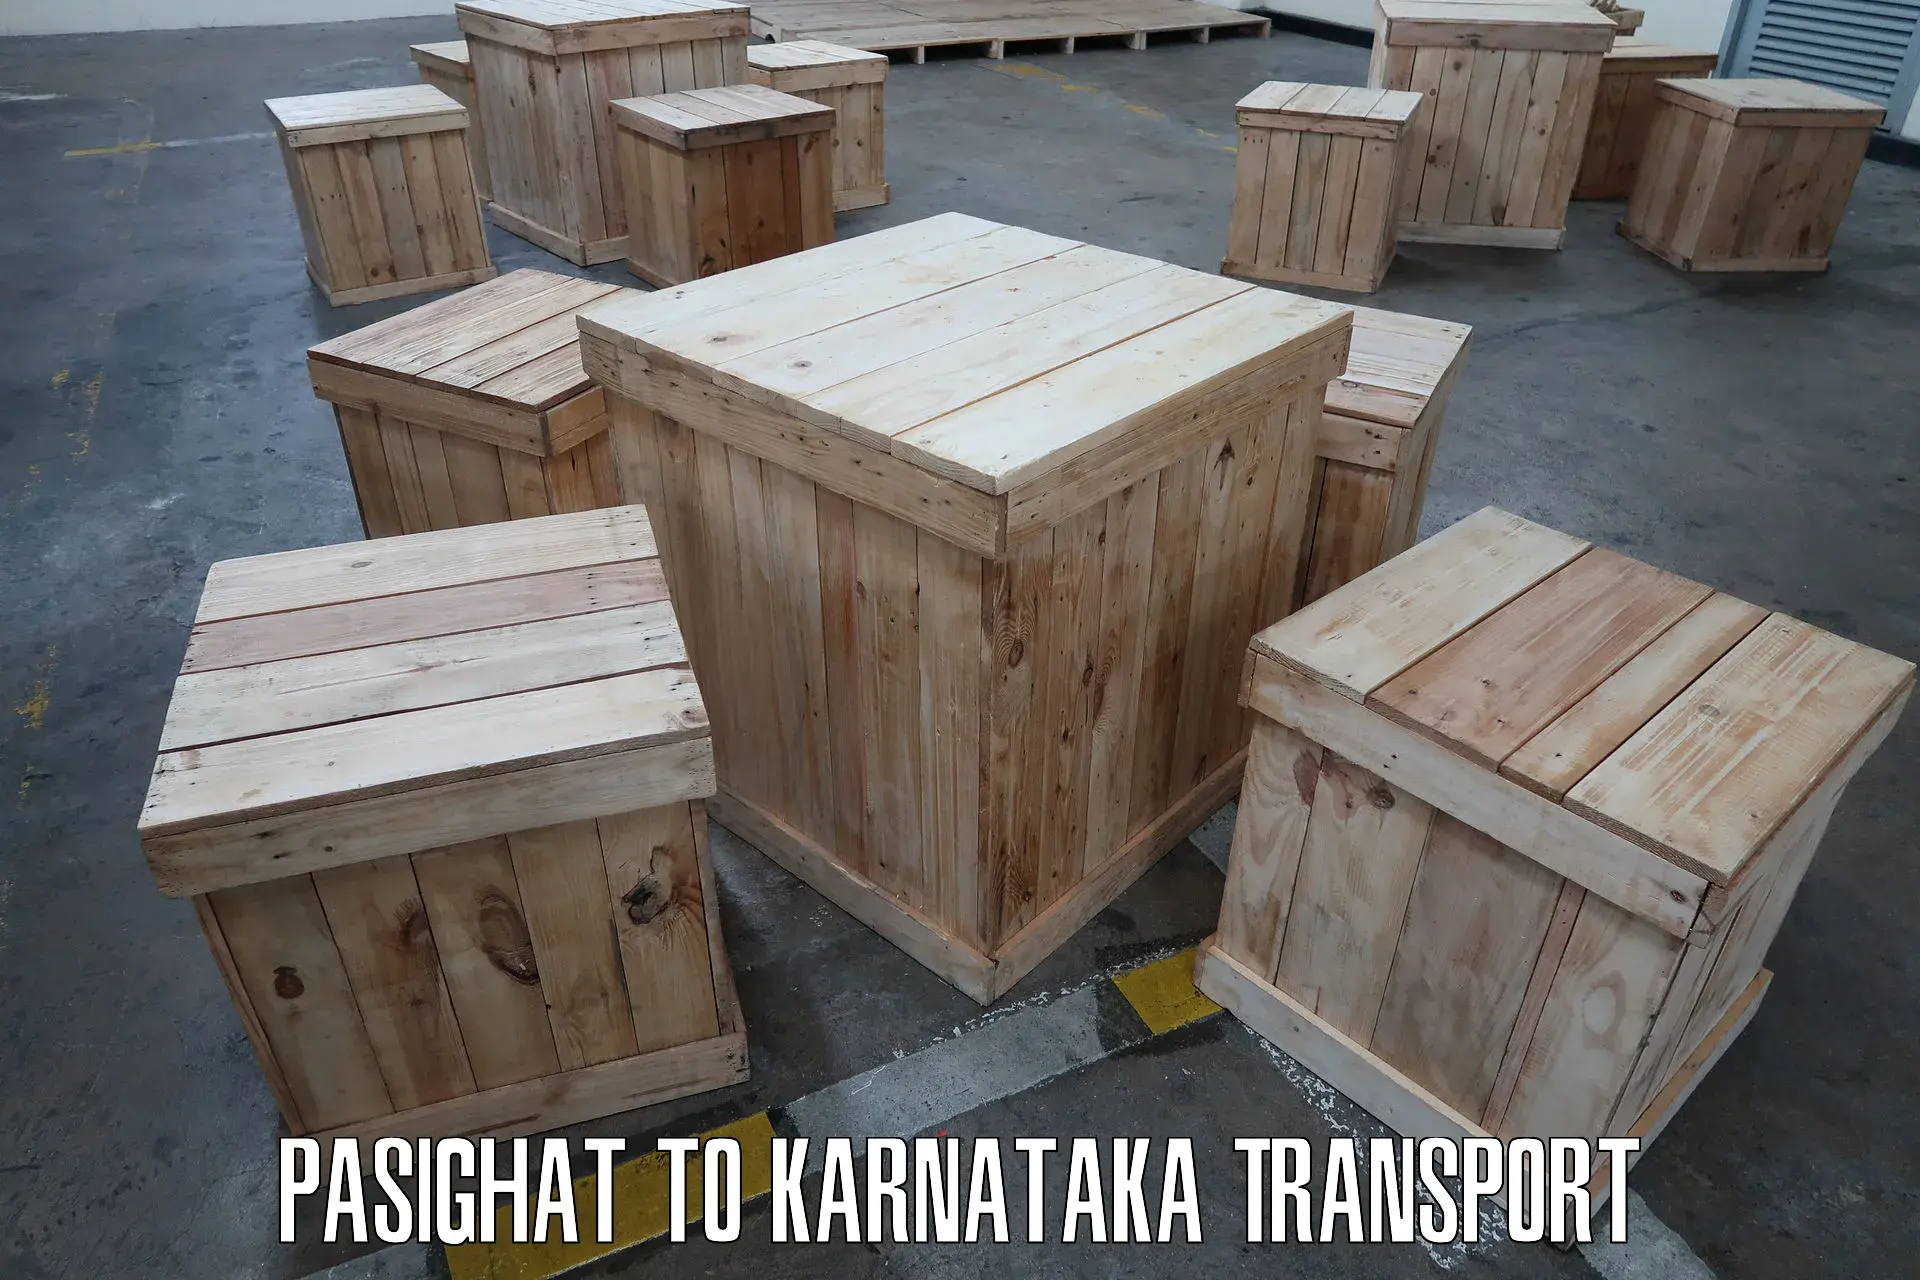 Truck transport companies in India Pasighat to Ilkal